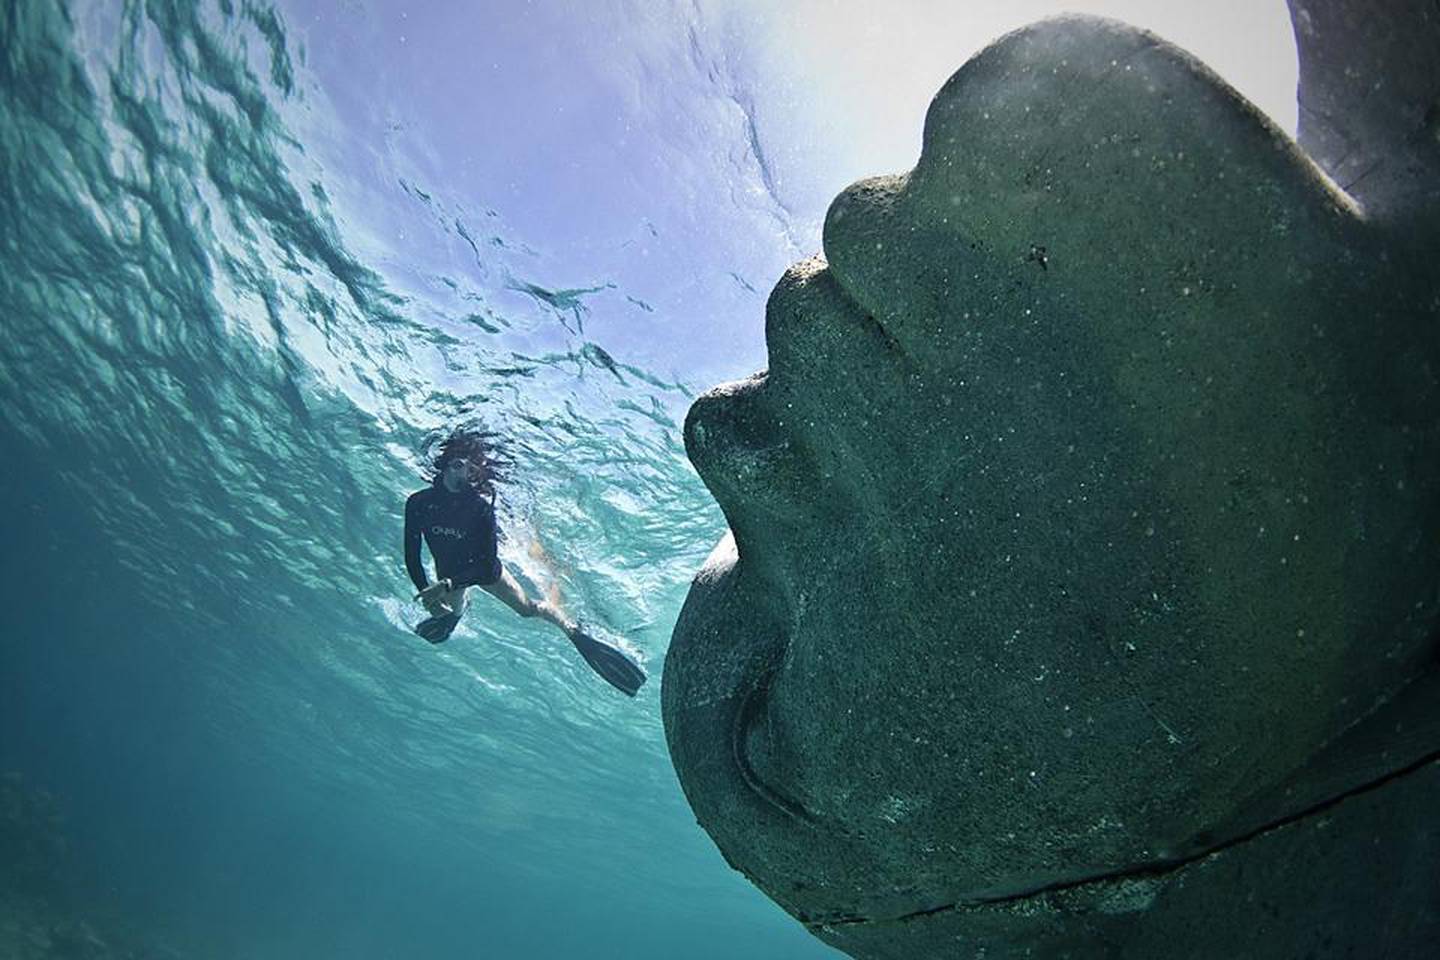 As well as bringing awareness to ocean conservation, the pH-neutral sculptures can attract a host of marine species including corals, sponges, hydroids and algae. Courtesy Jason deCaires Taylor